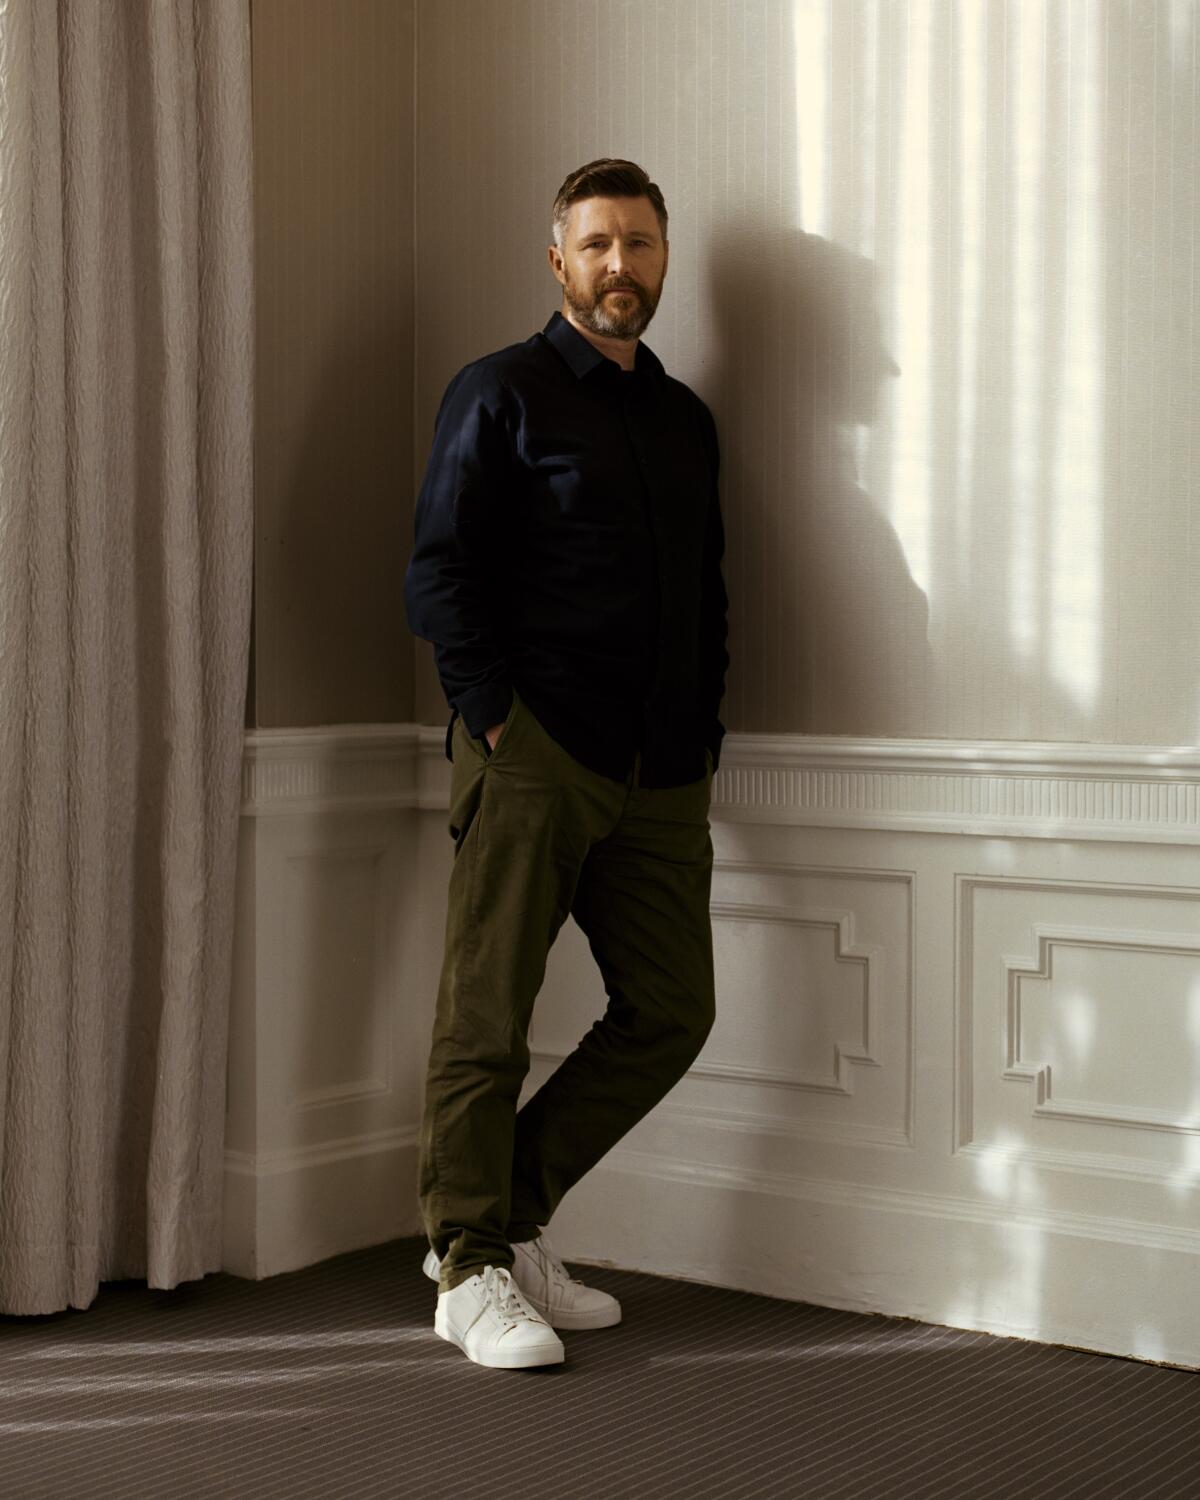 Andrew Haigh leans against a wall for a portrait.